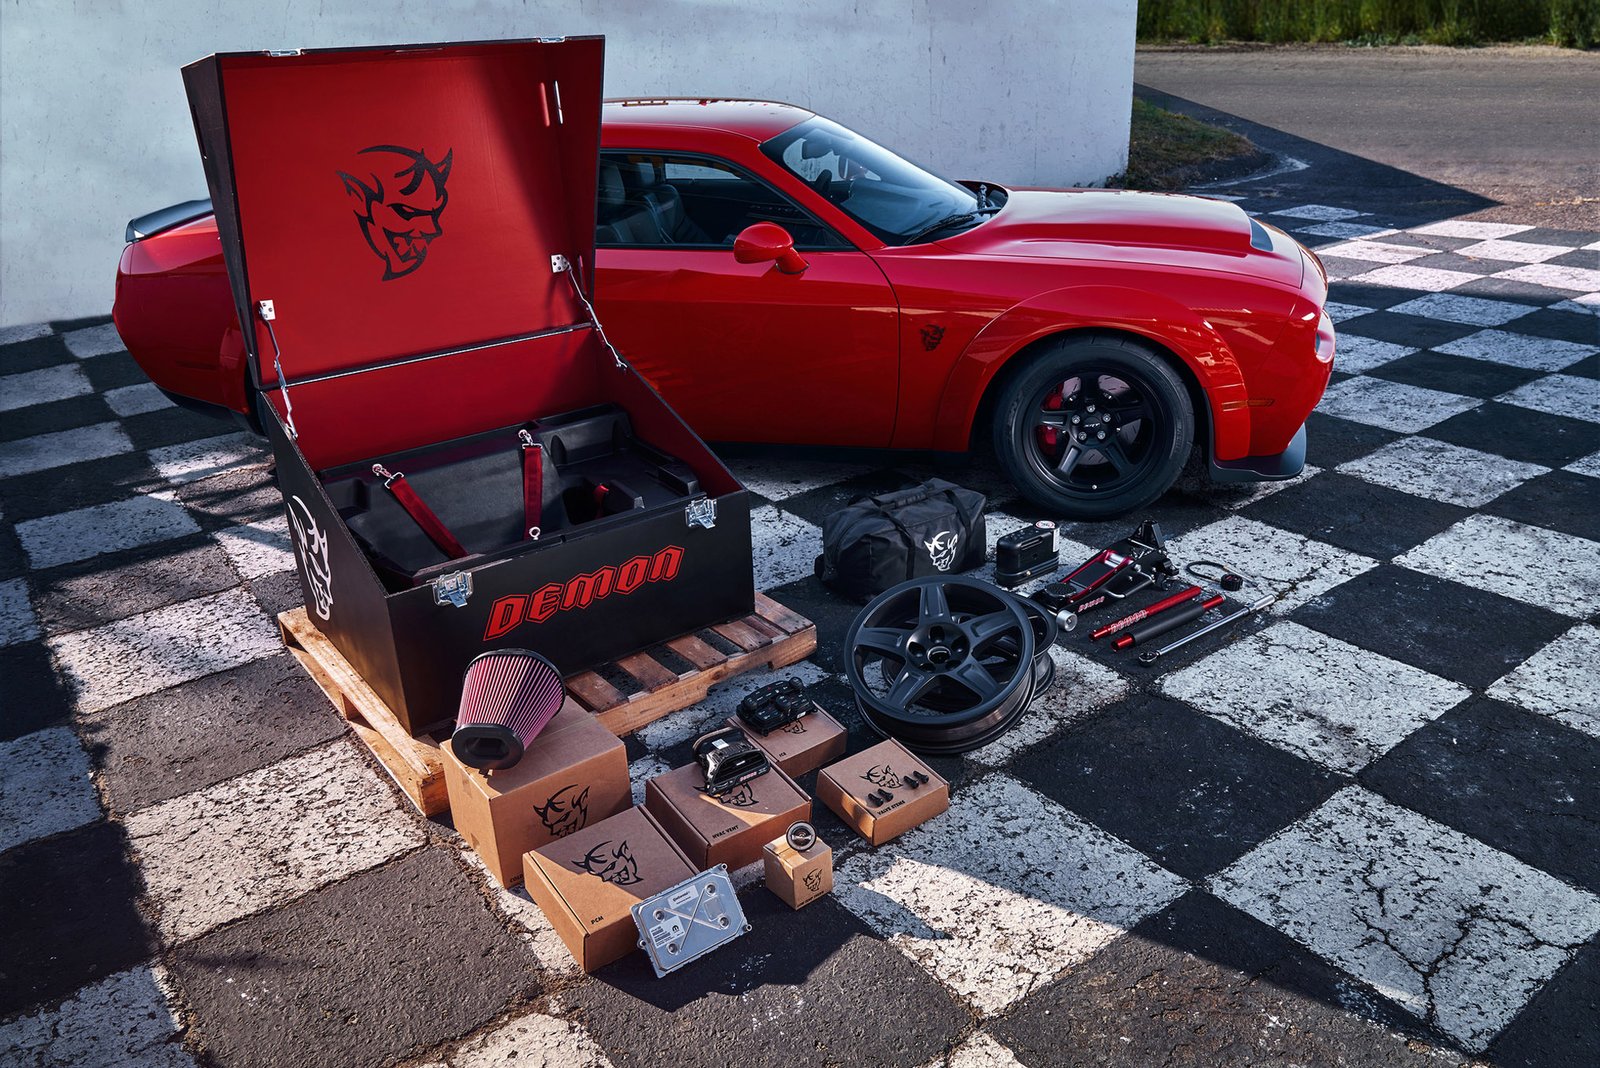 The custom-painted Demon Crate contains 18 components that maxim